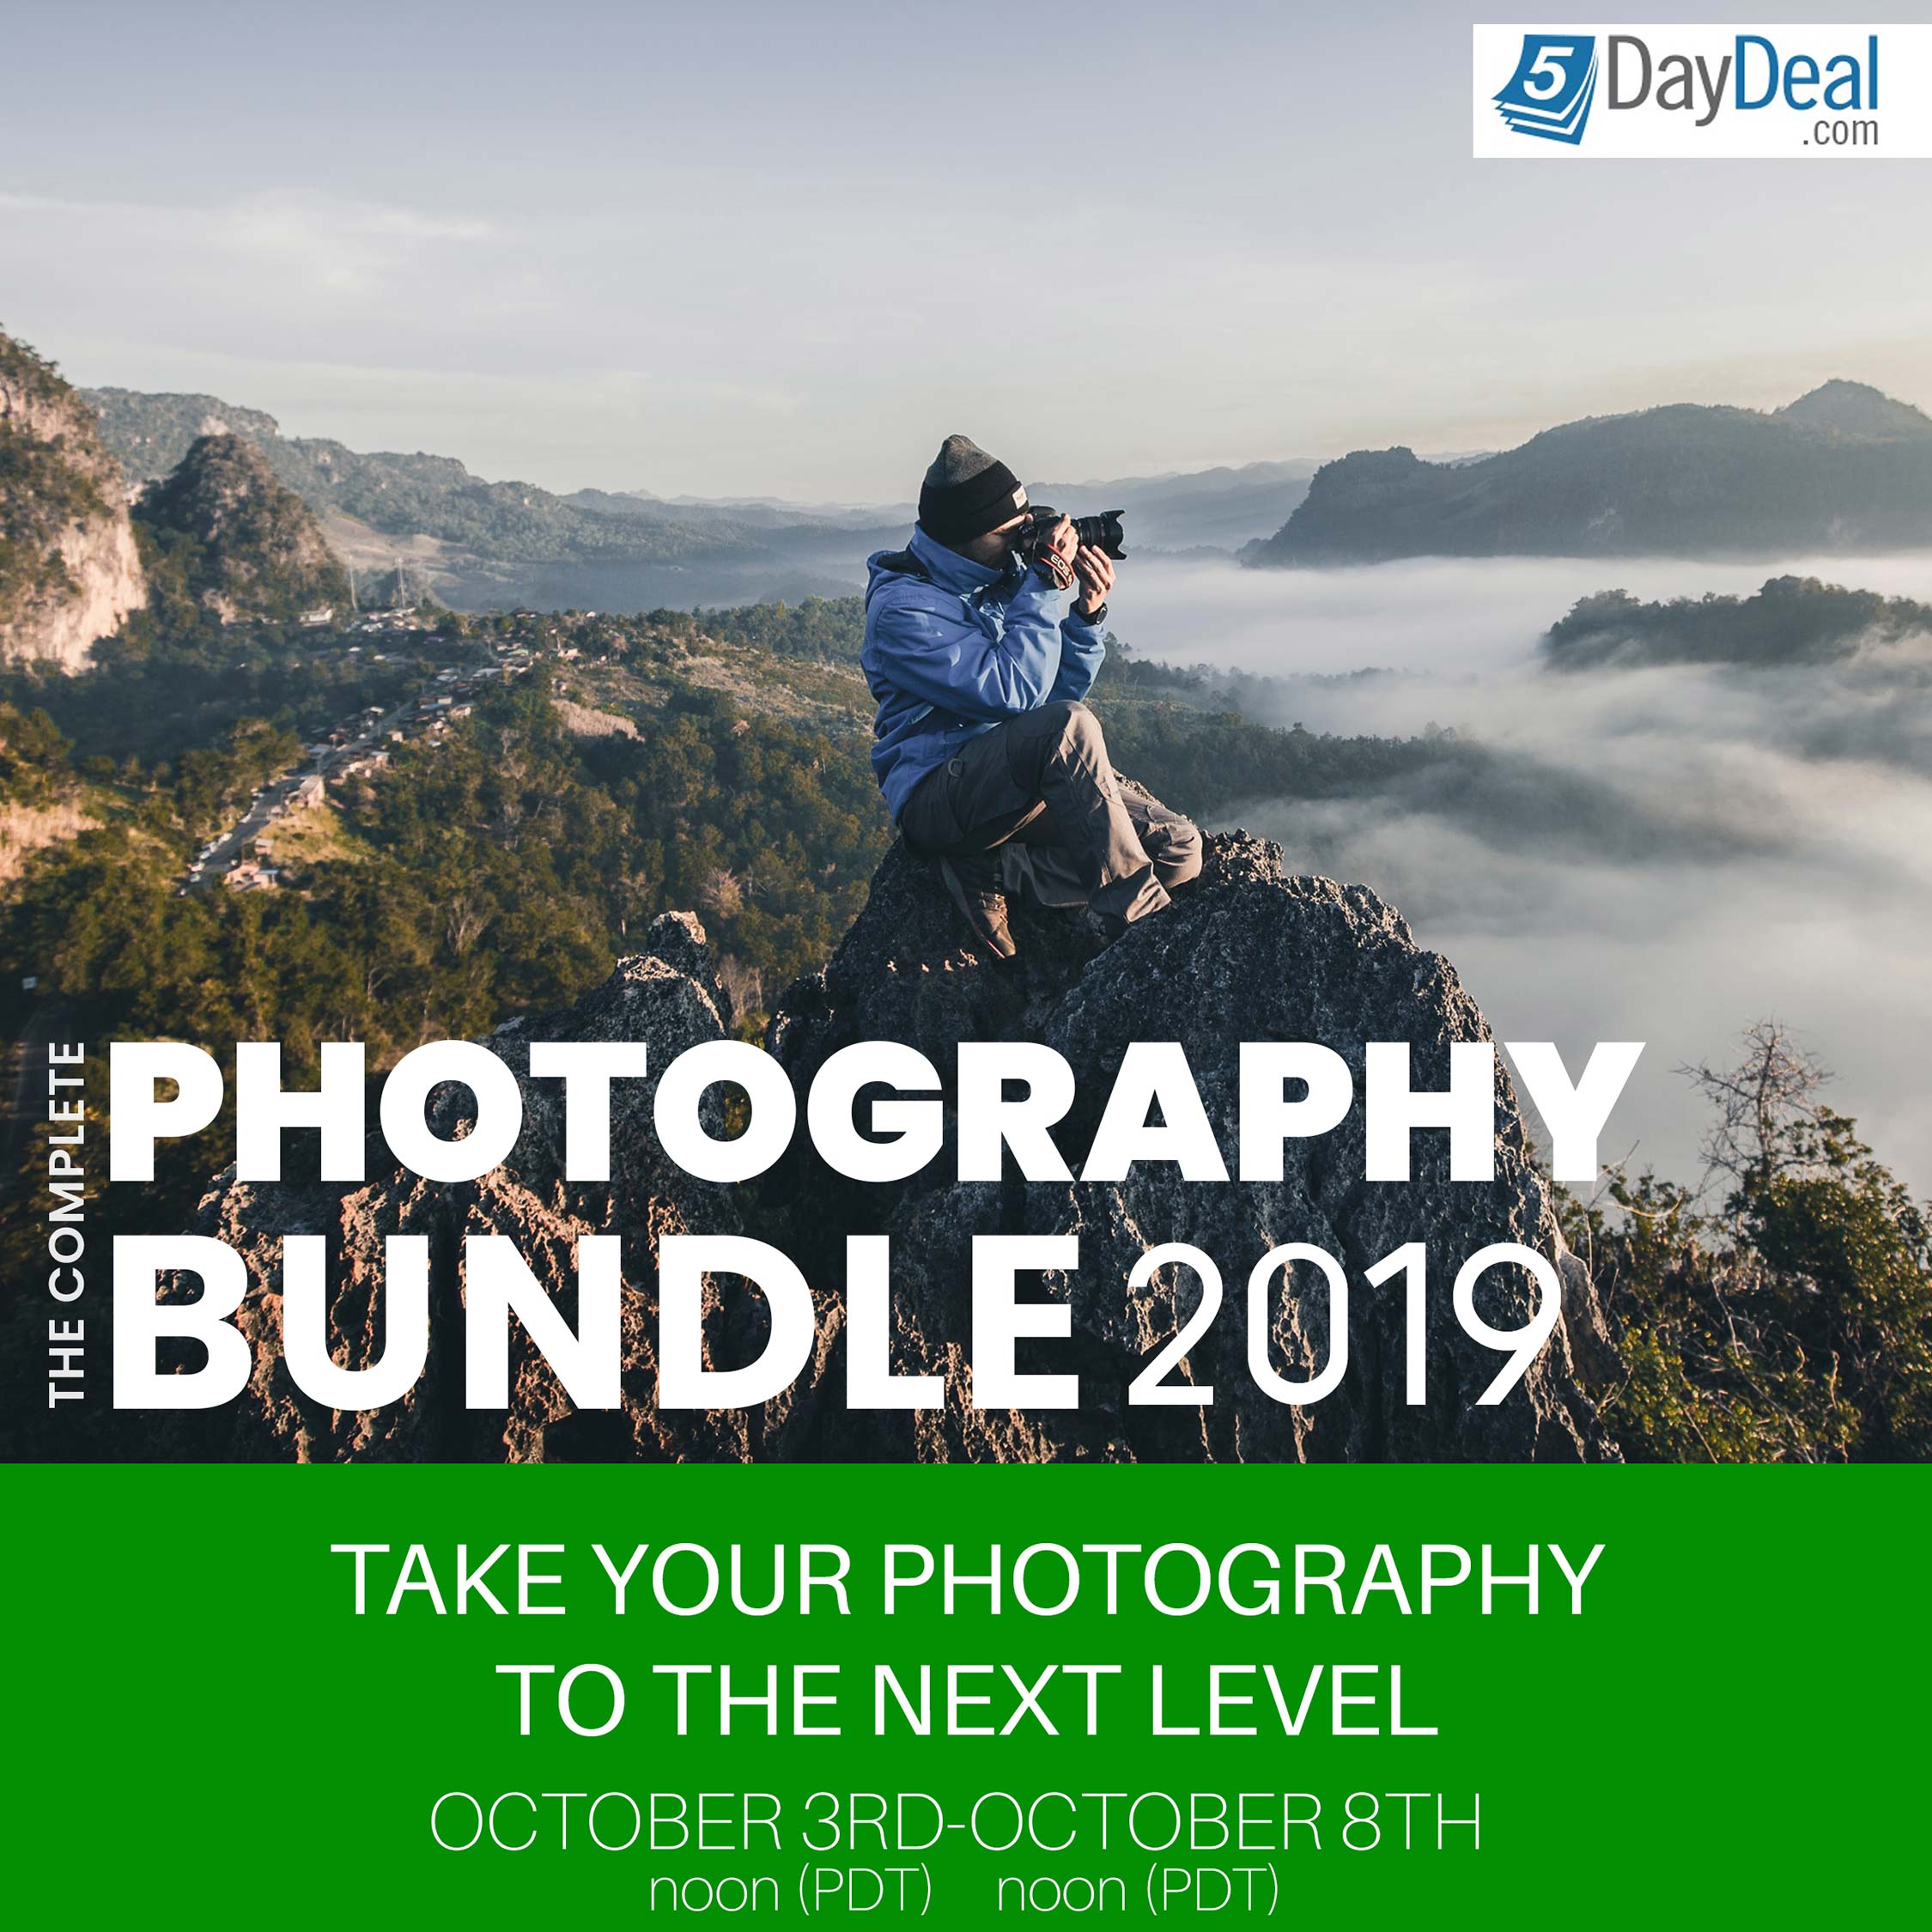 The Complete Photography Bundle 2019 It’s Time To Make Stunning Images!